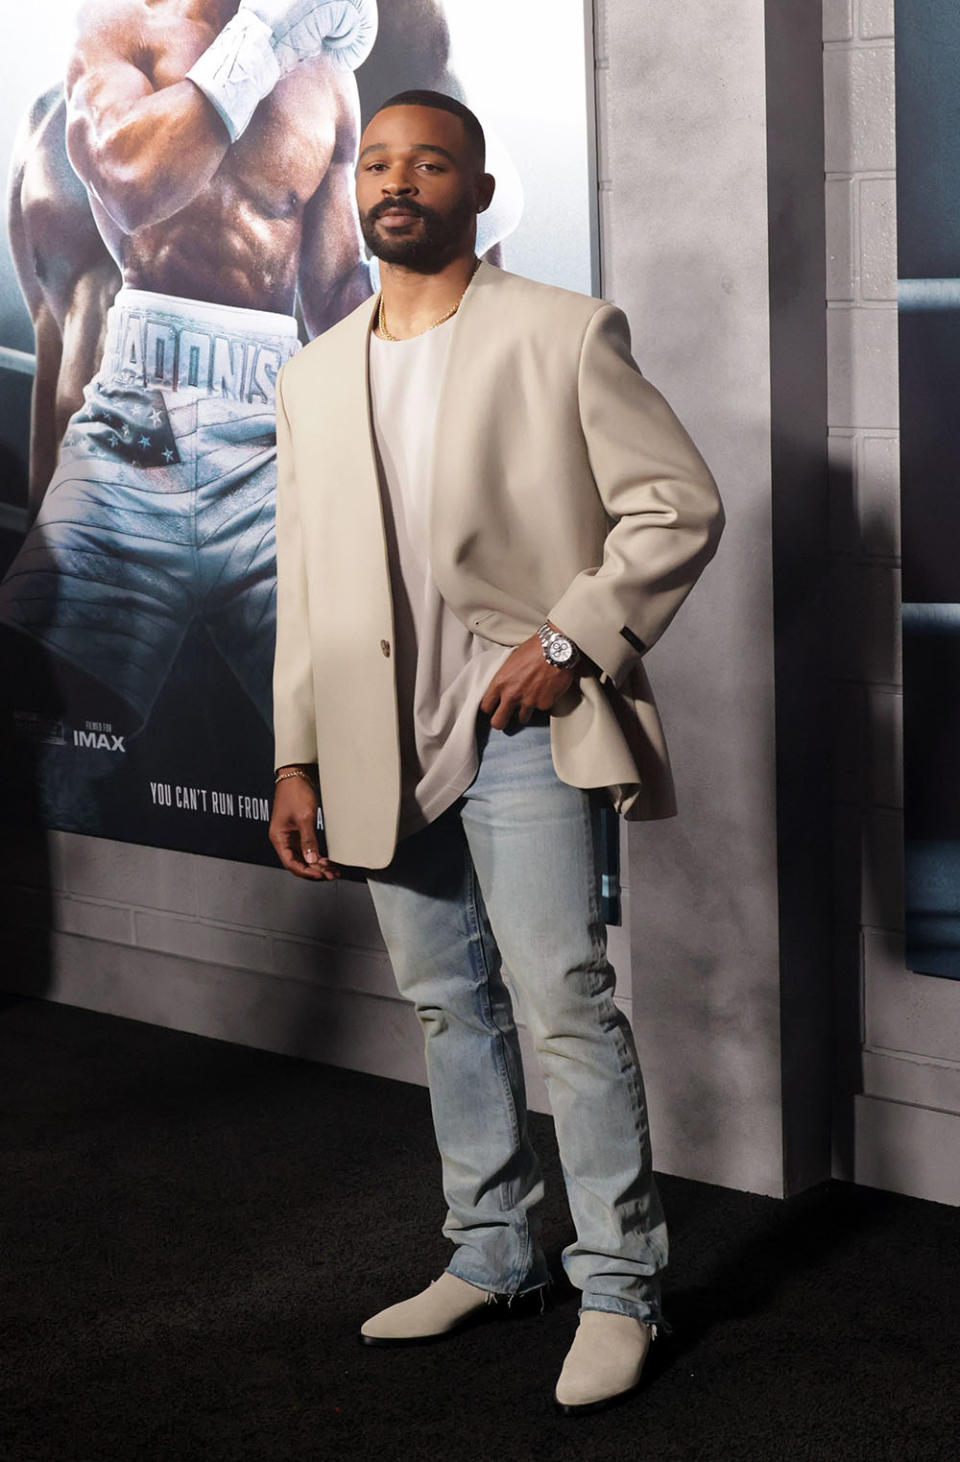 Keenan Coogler attends the Los Angeles Premiere of "CREED III" at TCL Chinese Theatre on February 27, 2023 in Hollywood, California.